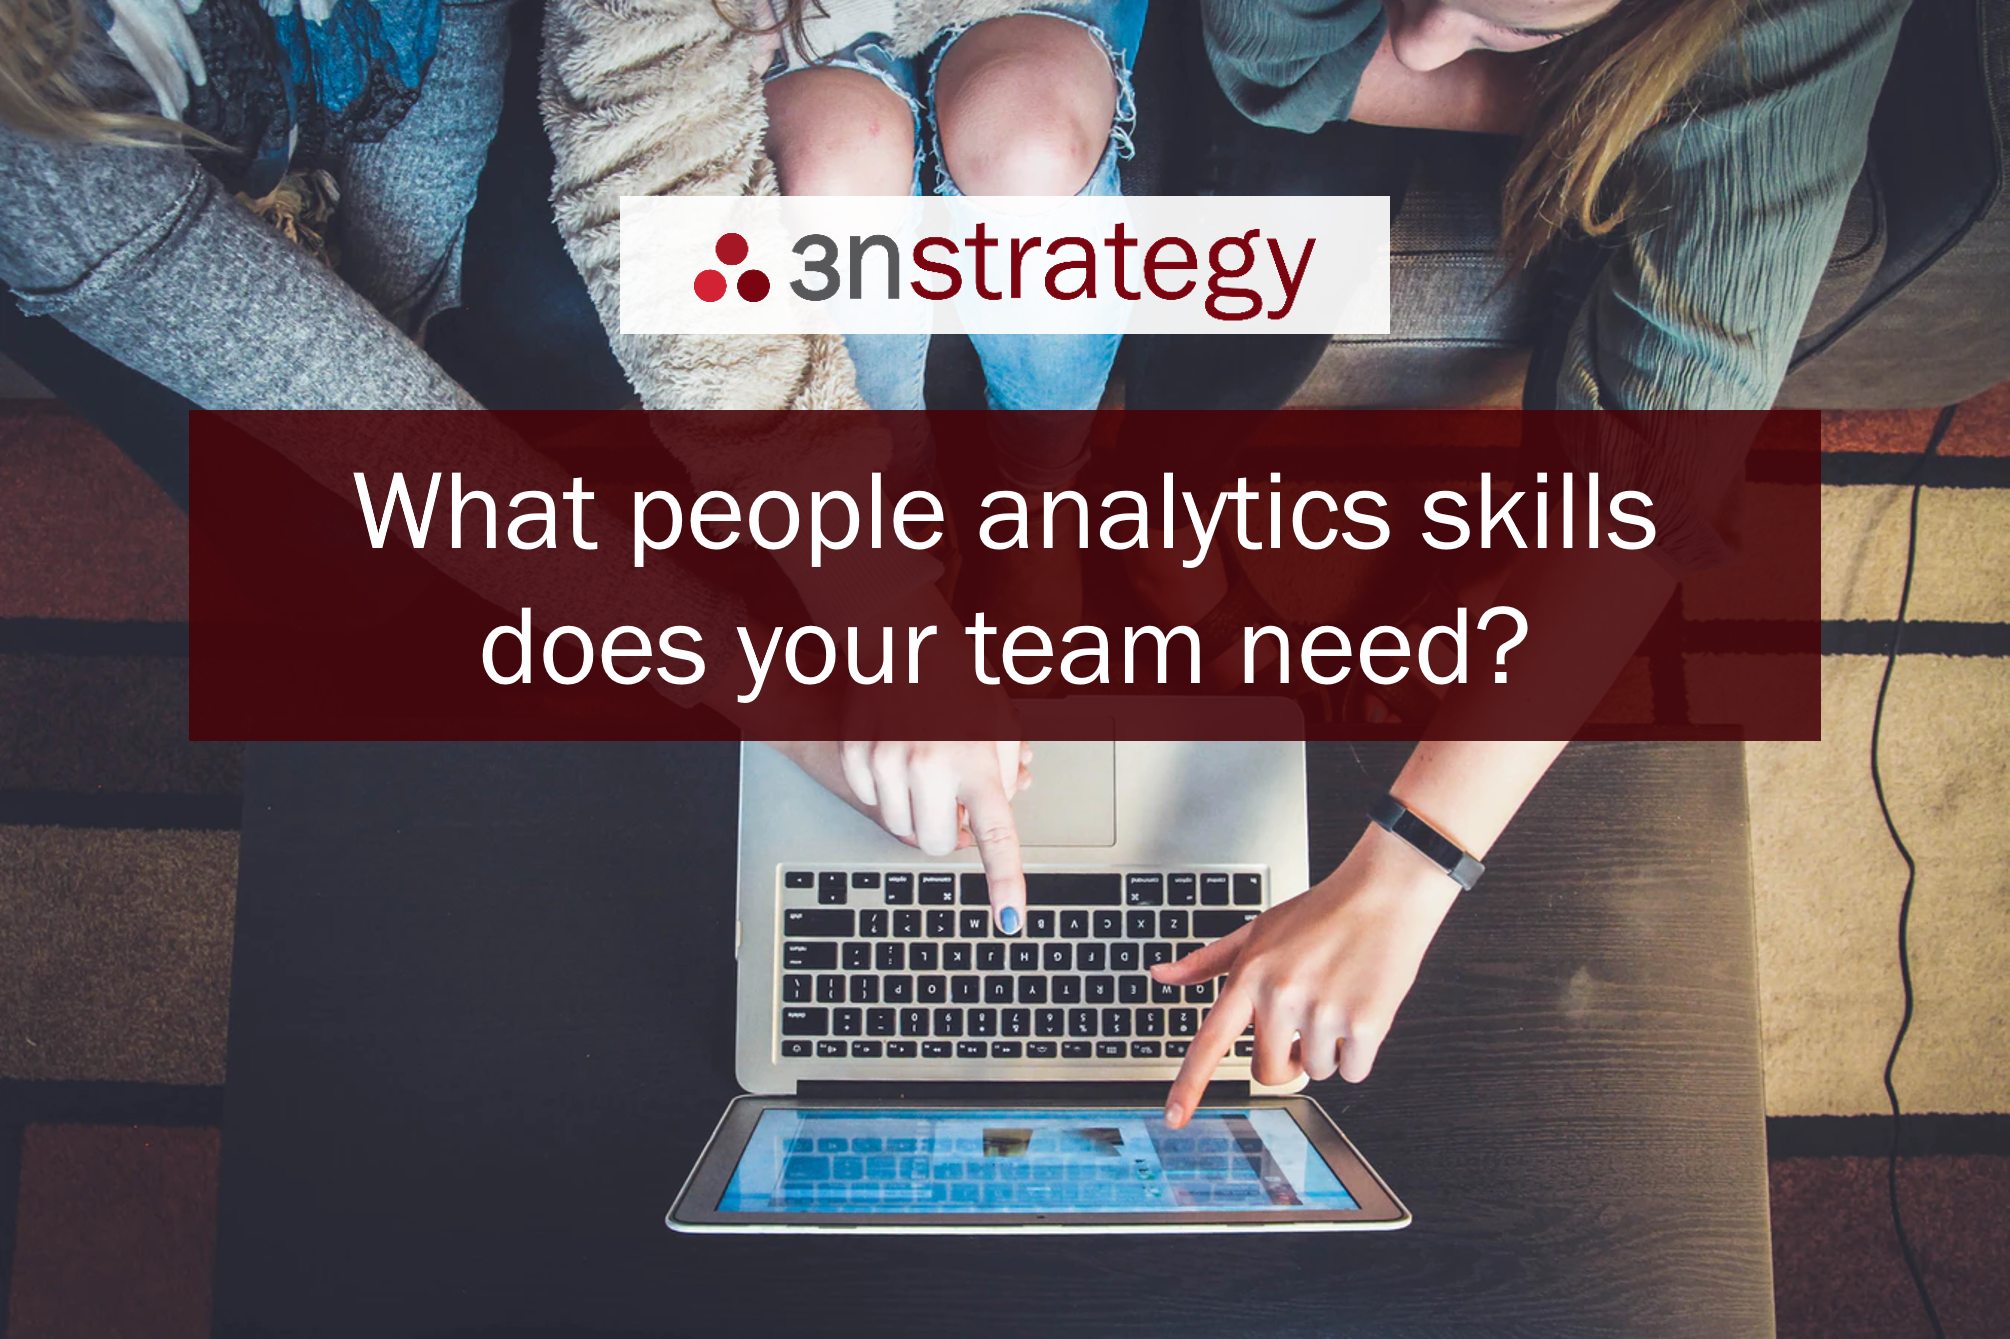 What people analytics skills does your team need?